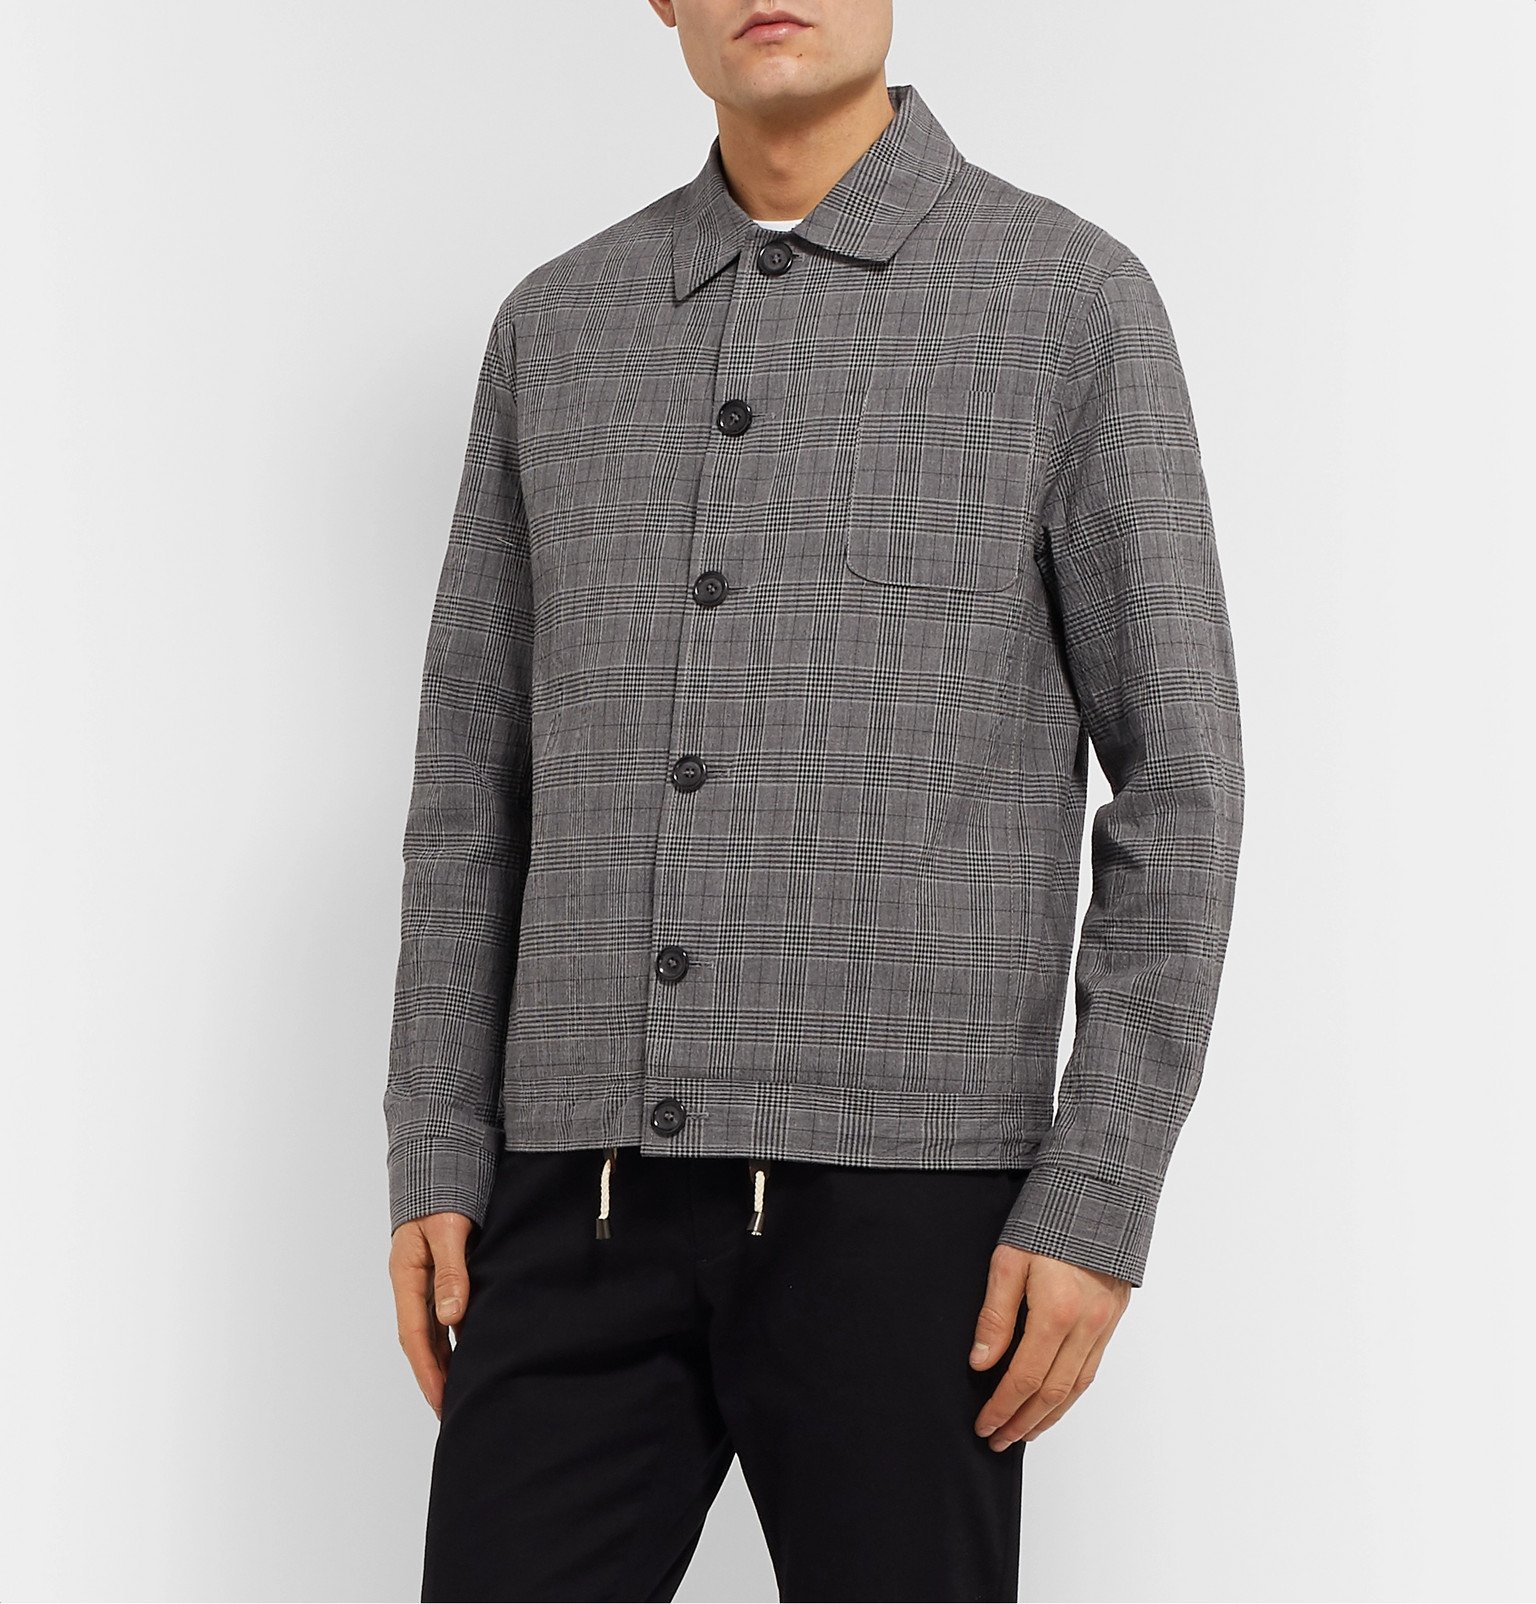 Oliver Spencer - Buckland Prince of Wales Checked Cotton-Blend Jacket - Gray